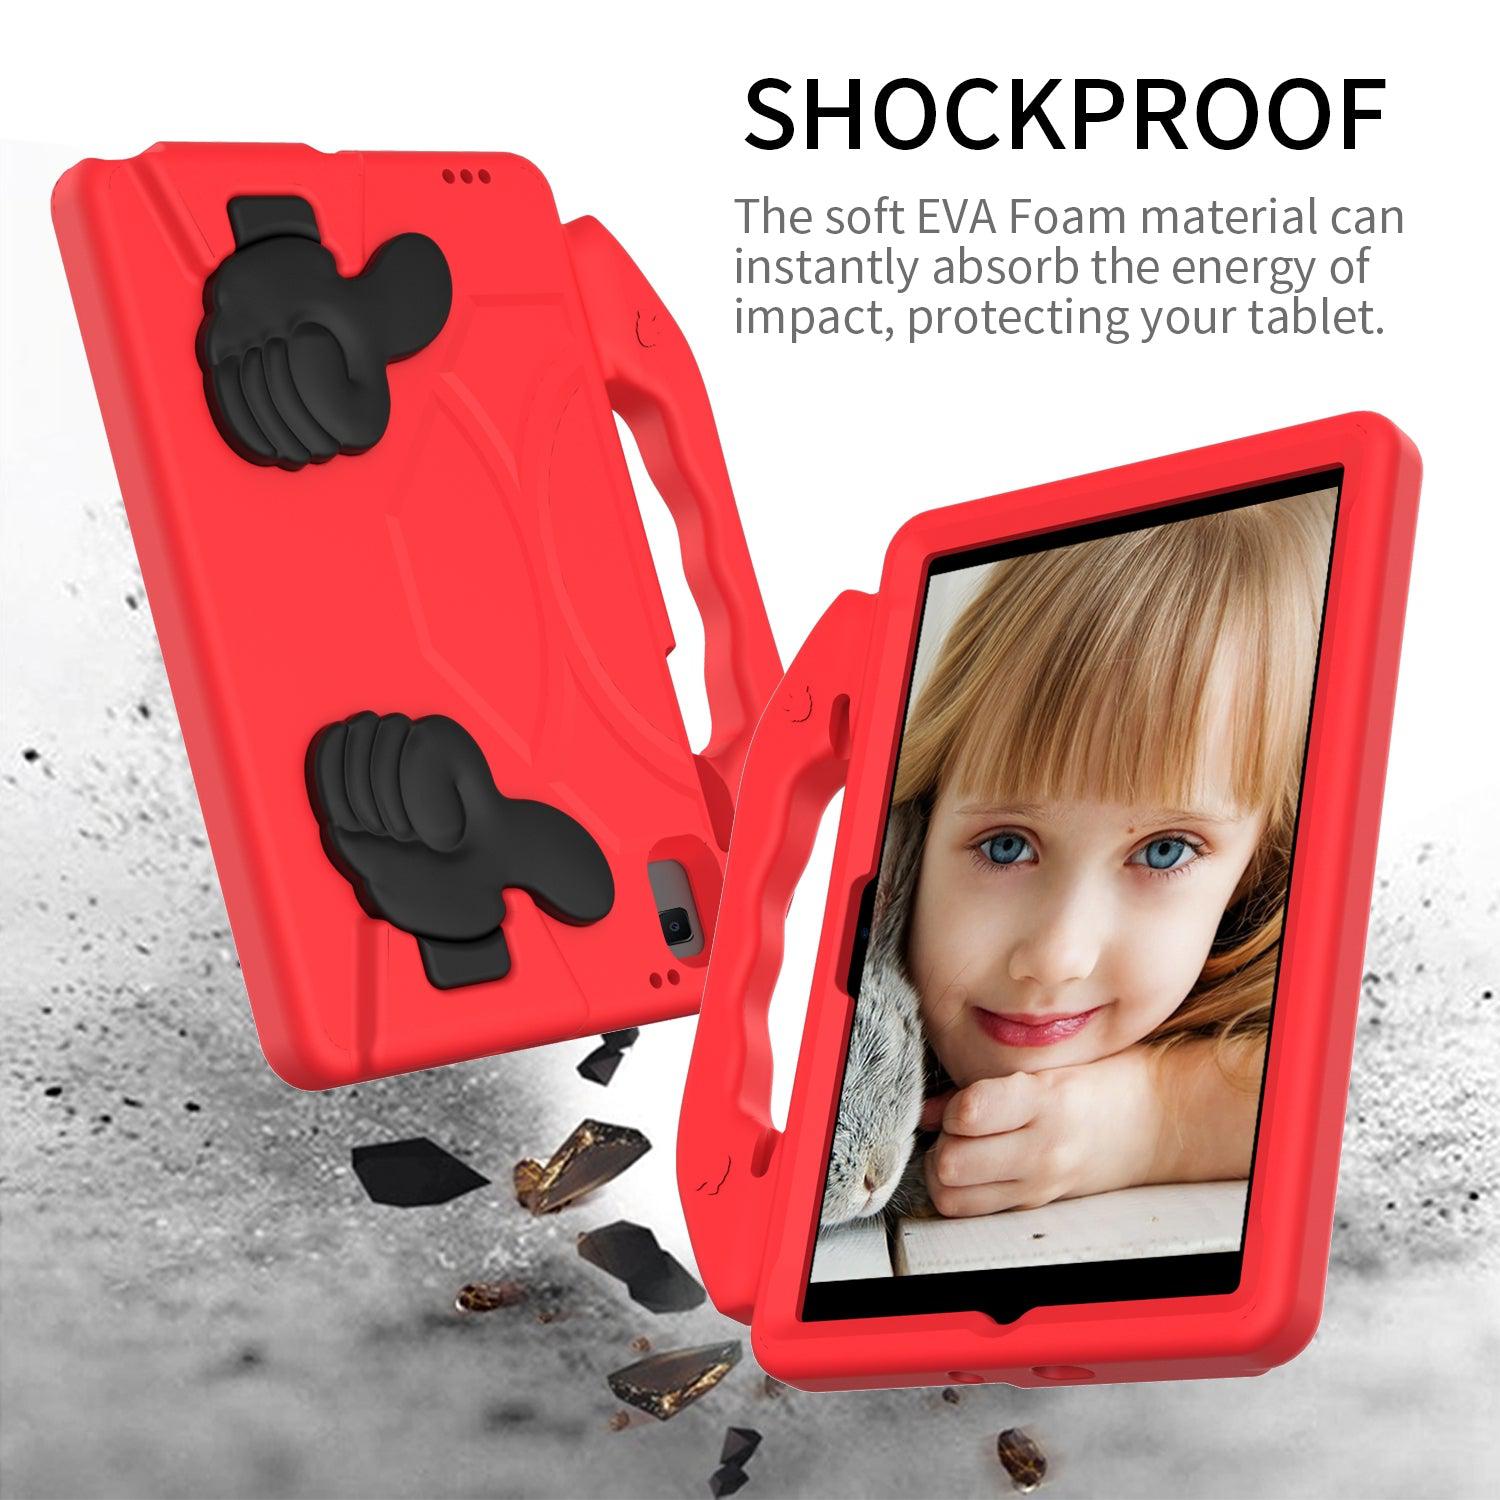 For Samsung Galaxy Tab A8 10.5 2021 Kids Friendly Case Shockproof Cover With Thumbs Up - Red-Samsung Tablet Cases & Covers-First Help Tech